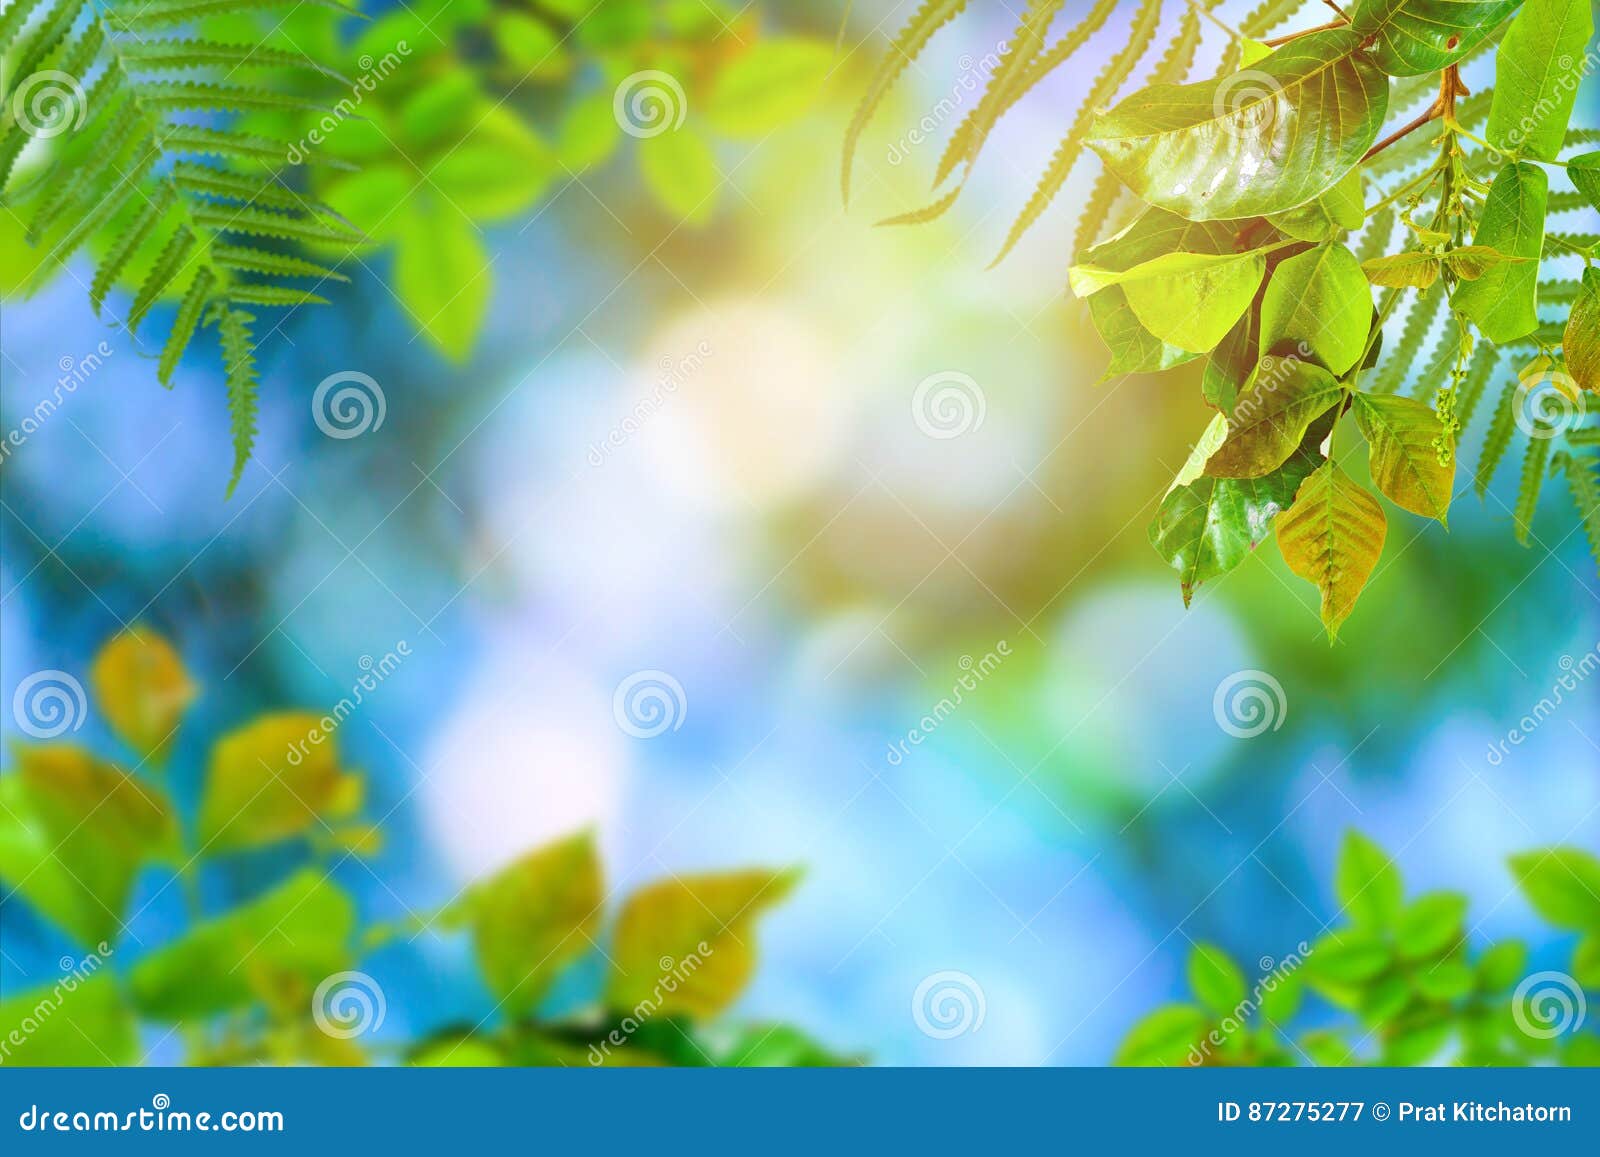 Green Trees and Leaf Greenery Bokeh Stock Image - Image of botany, leaf ...